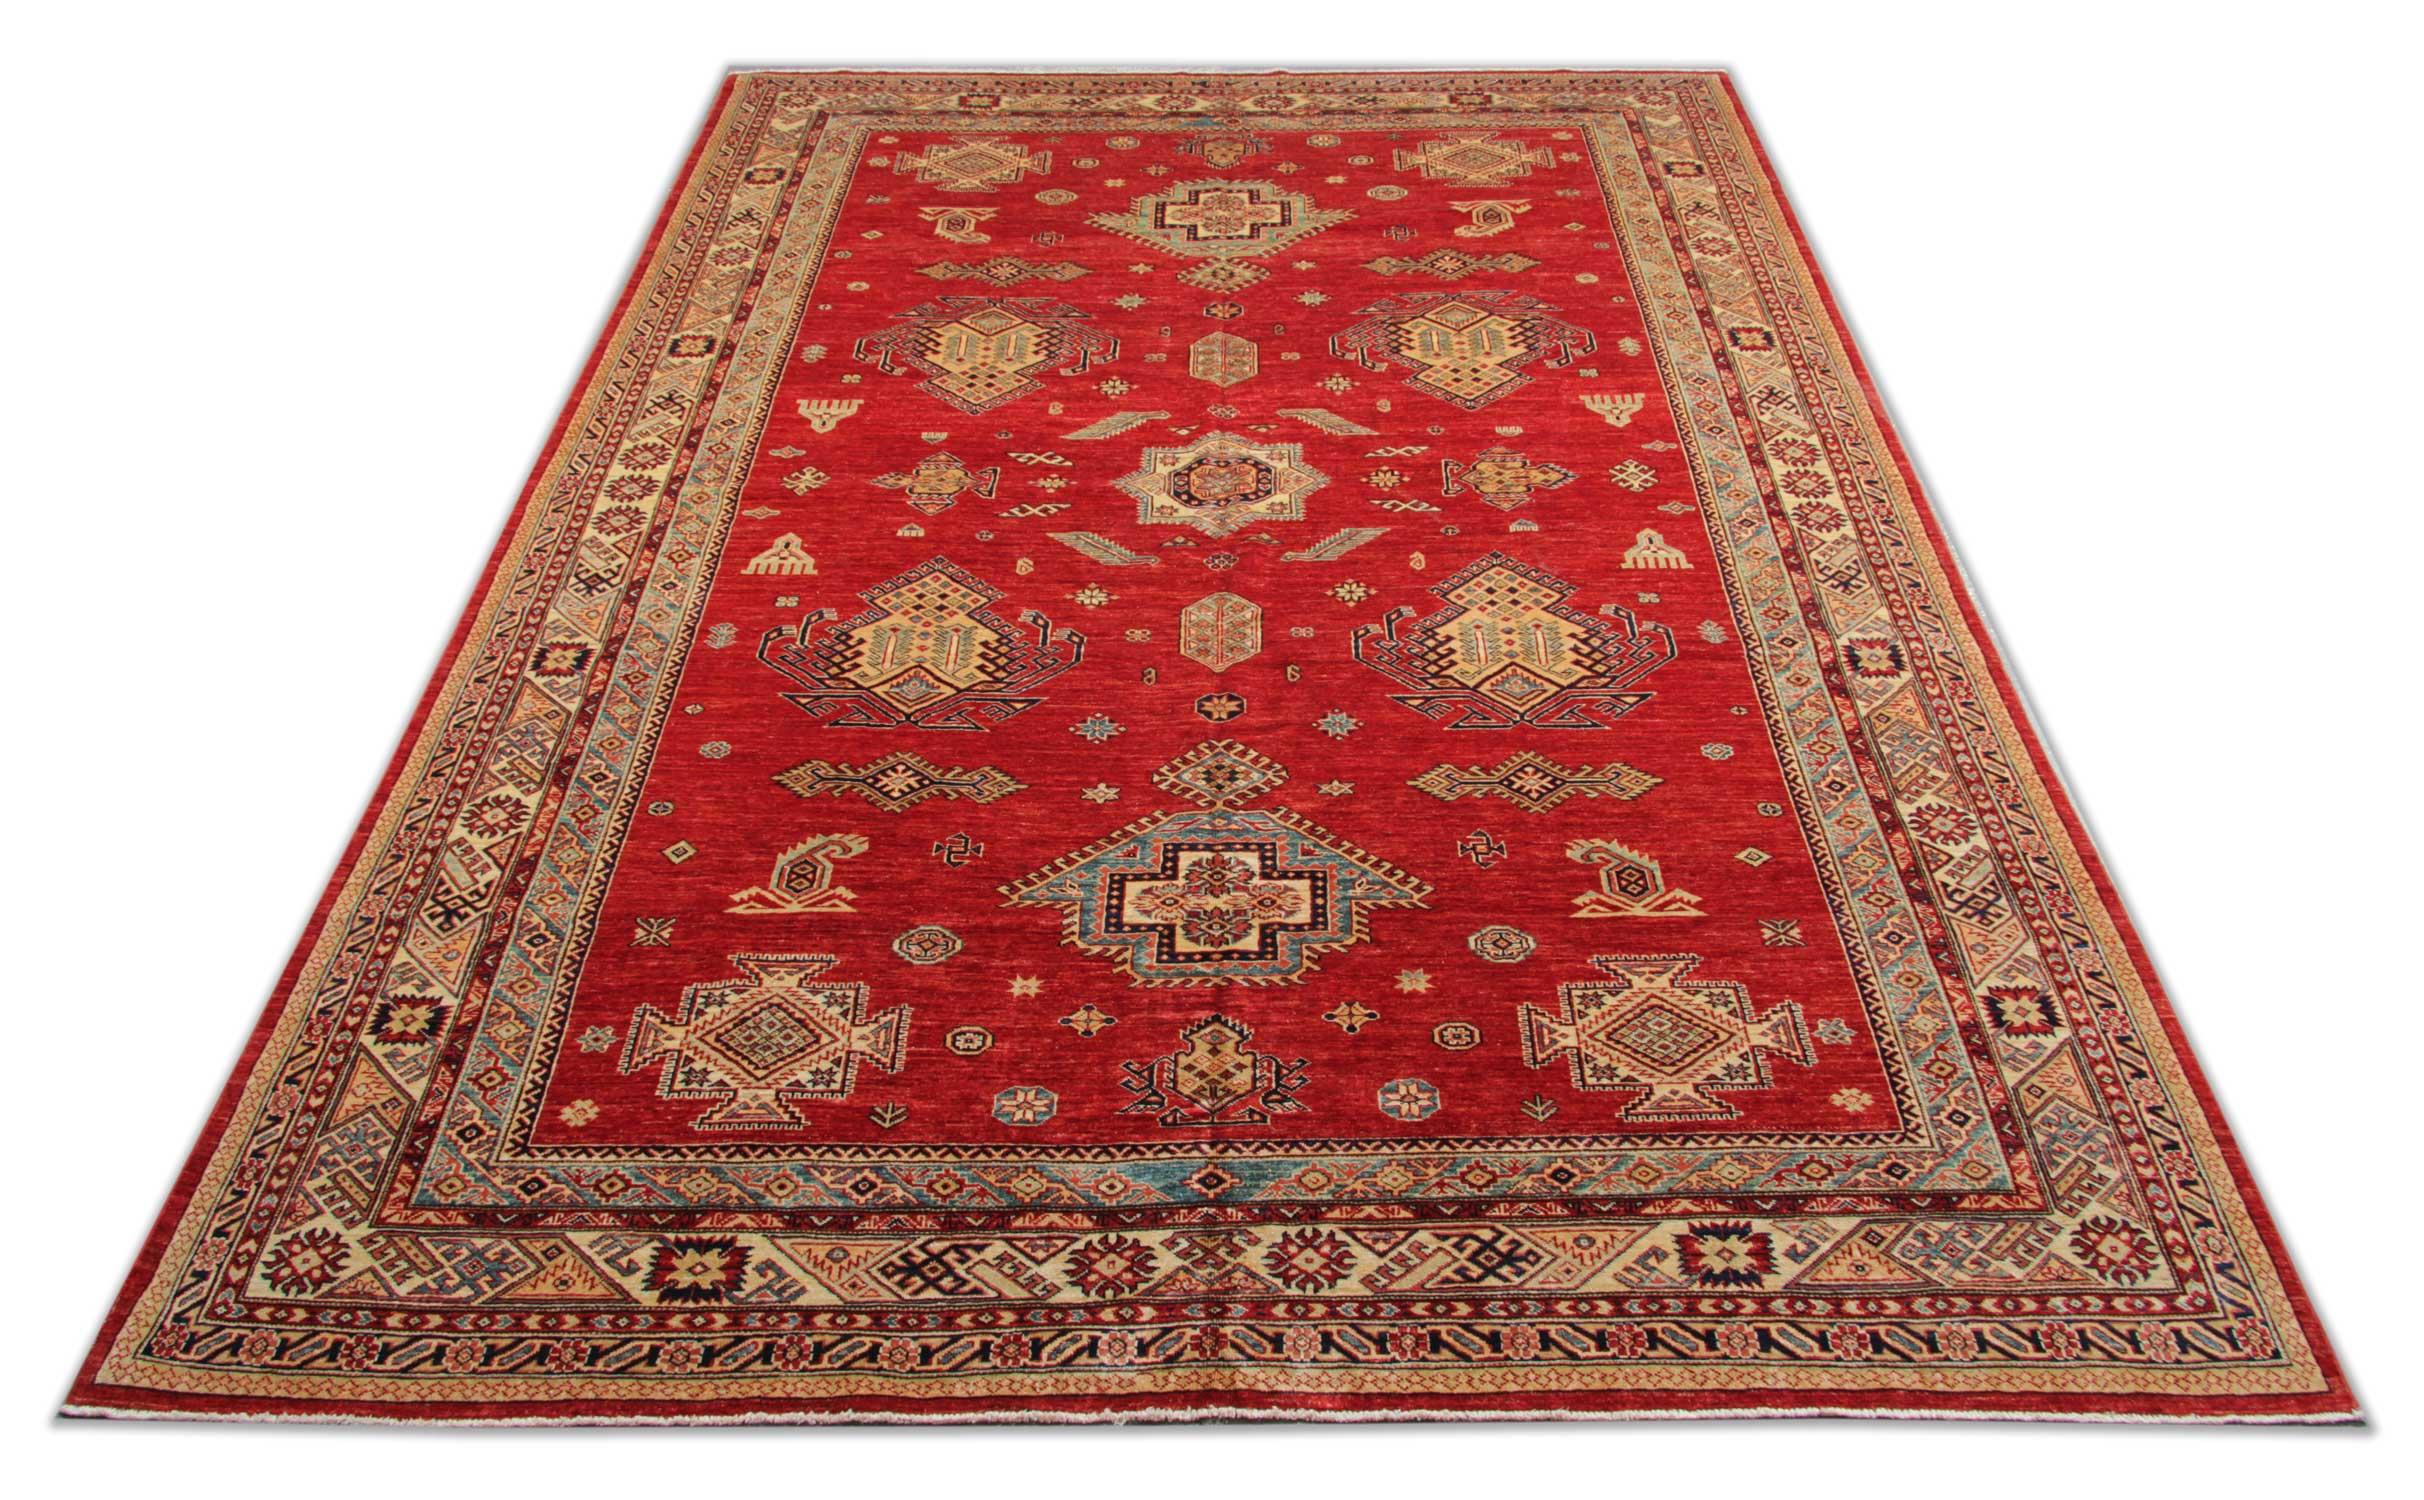 Handmade carpet Kazak large rugs are patterned oriental rugs primarily produced as village productions rather than city pieces. This red rug is made from organic materials particular to individual tribal provinces, and the rugs of the Caucasus